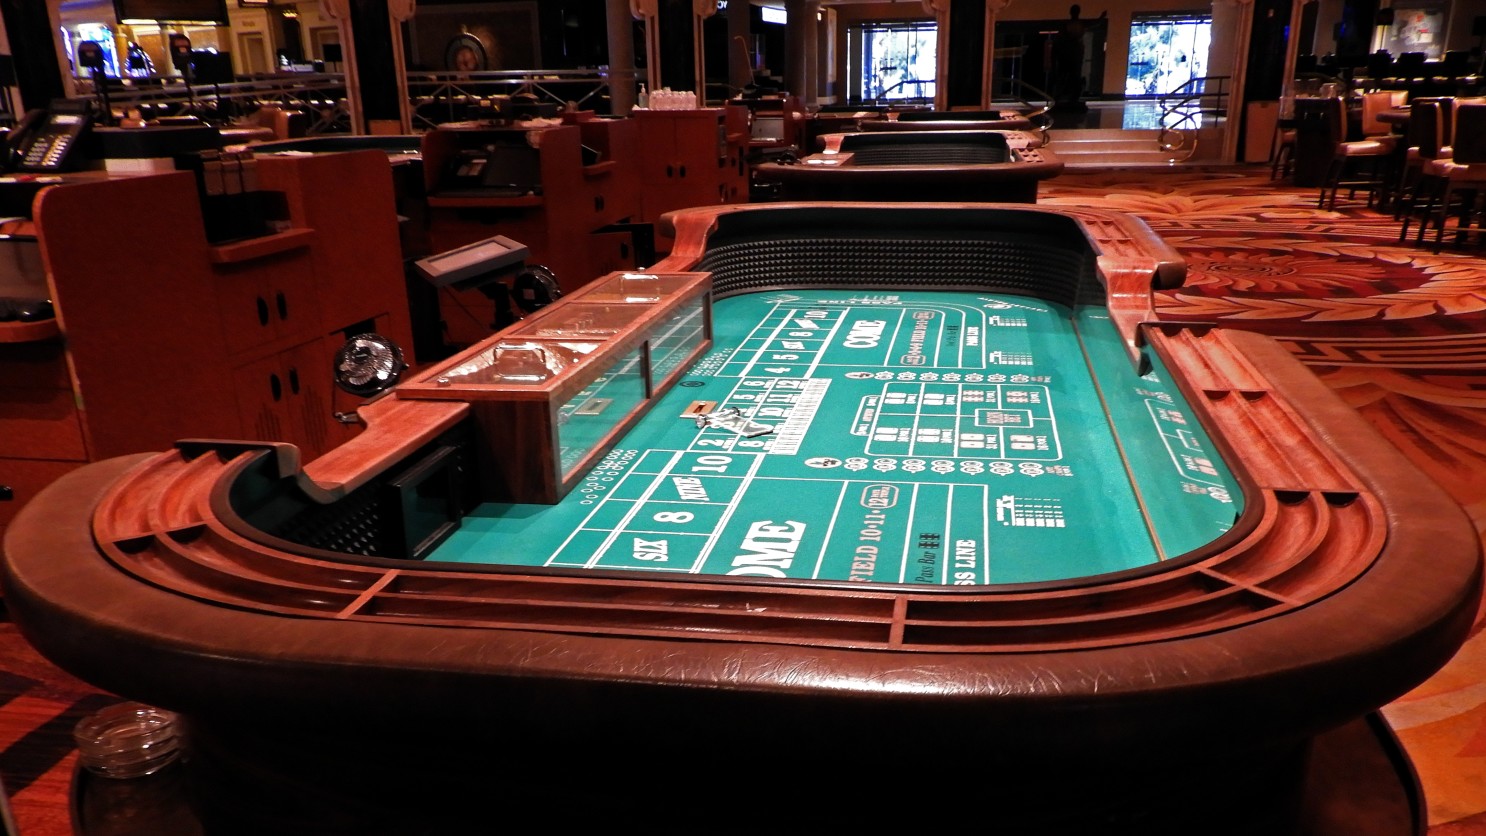 Craps Tables are often the loudest tables on the Casino floor when the dice are rolling hot.